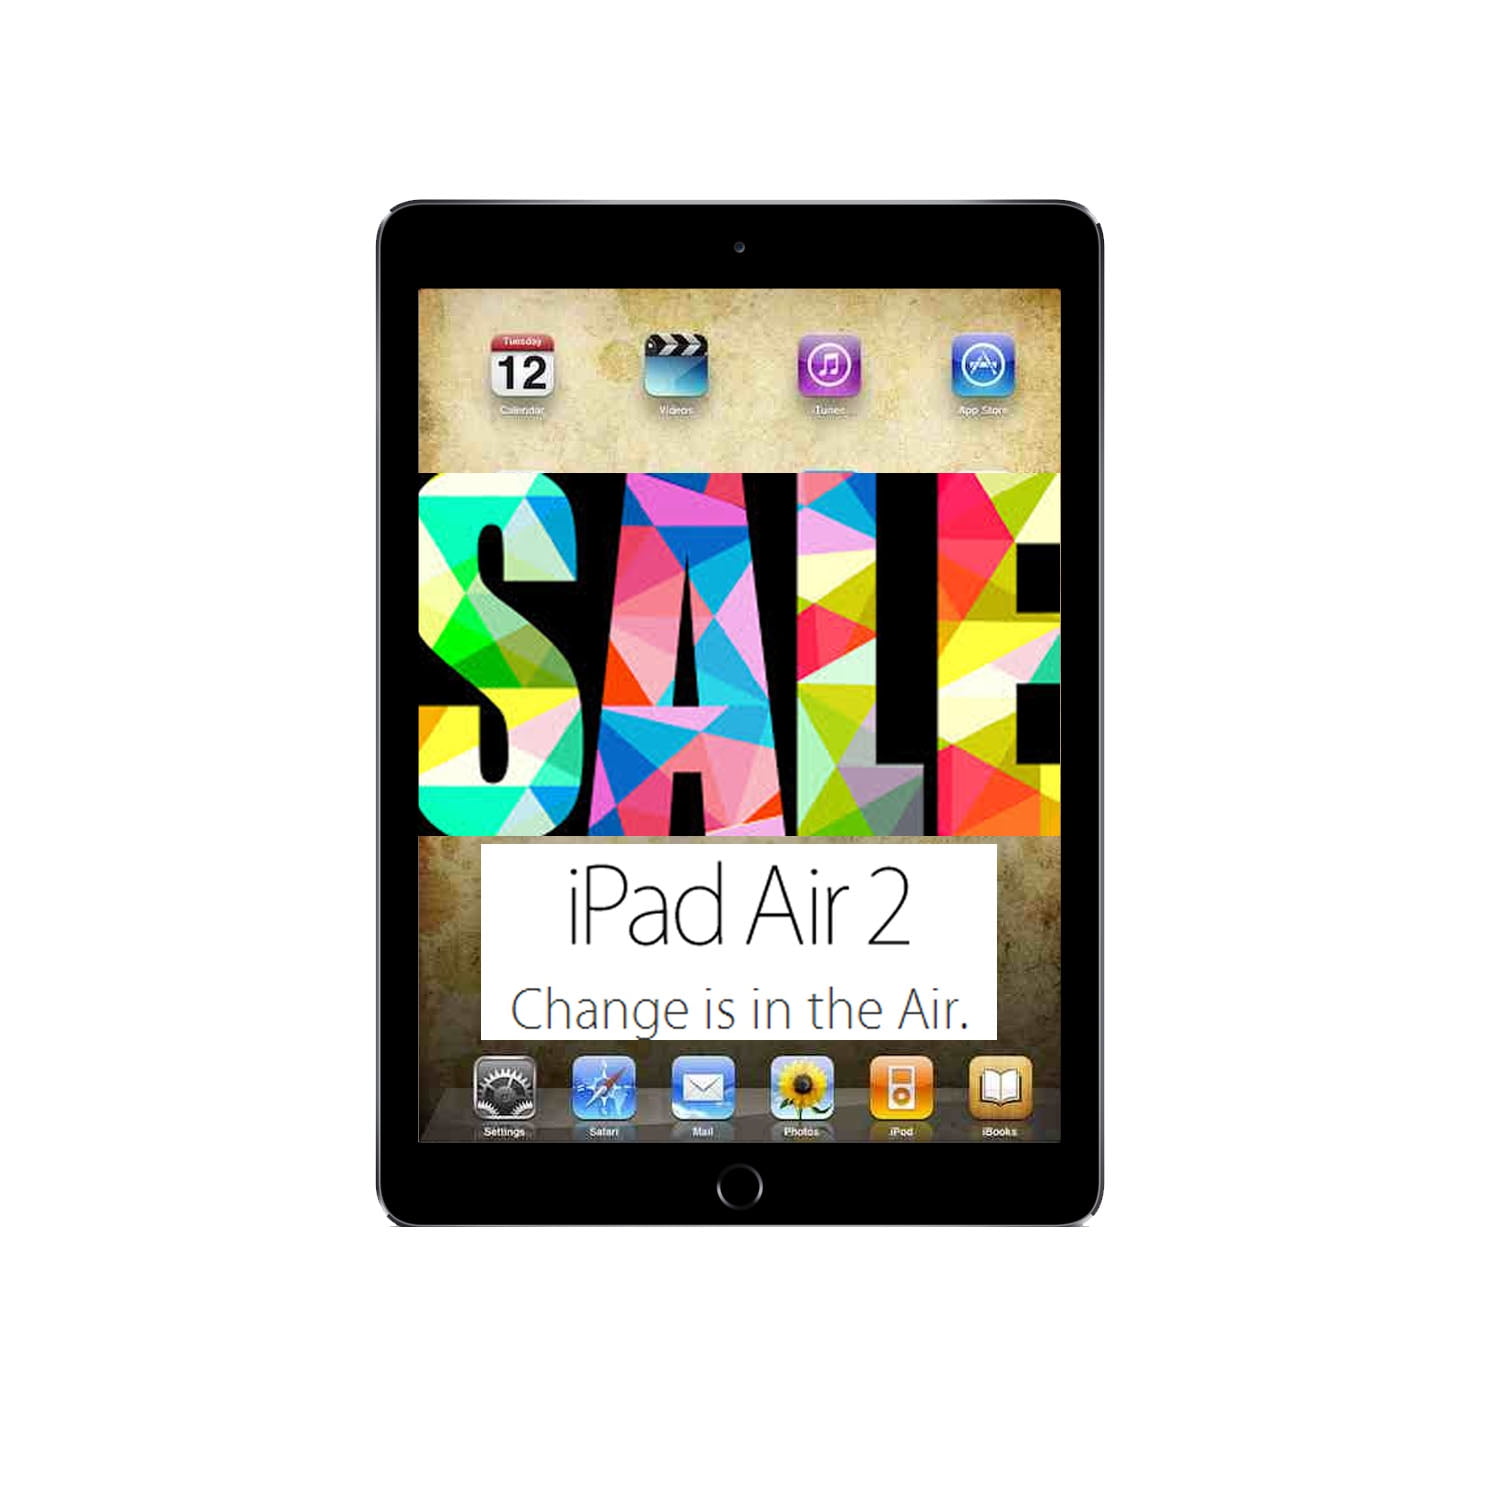 Apple iPad Air 2 Space Gray 16GB Wi-Fi Only with 1 Year Warranty